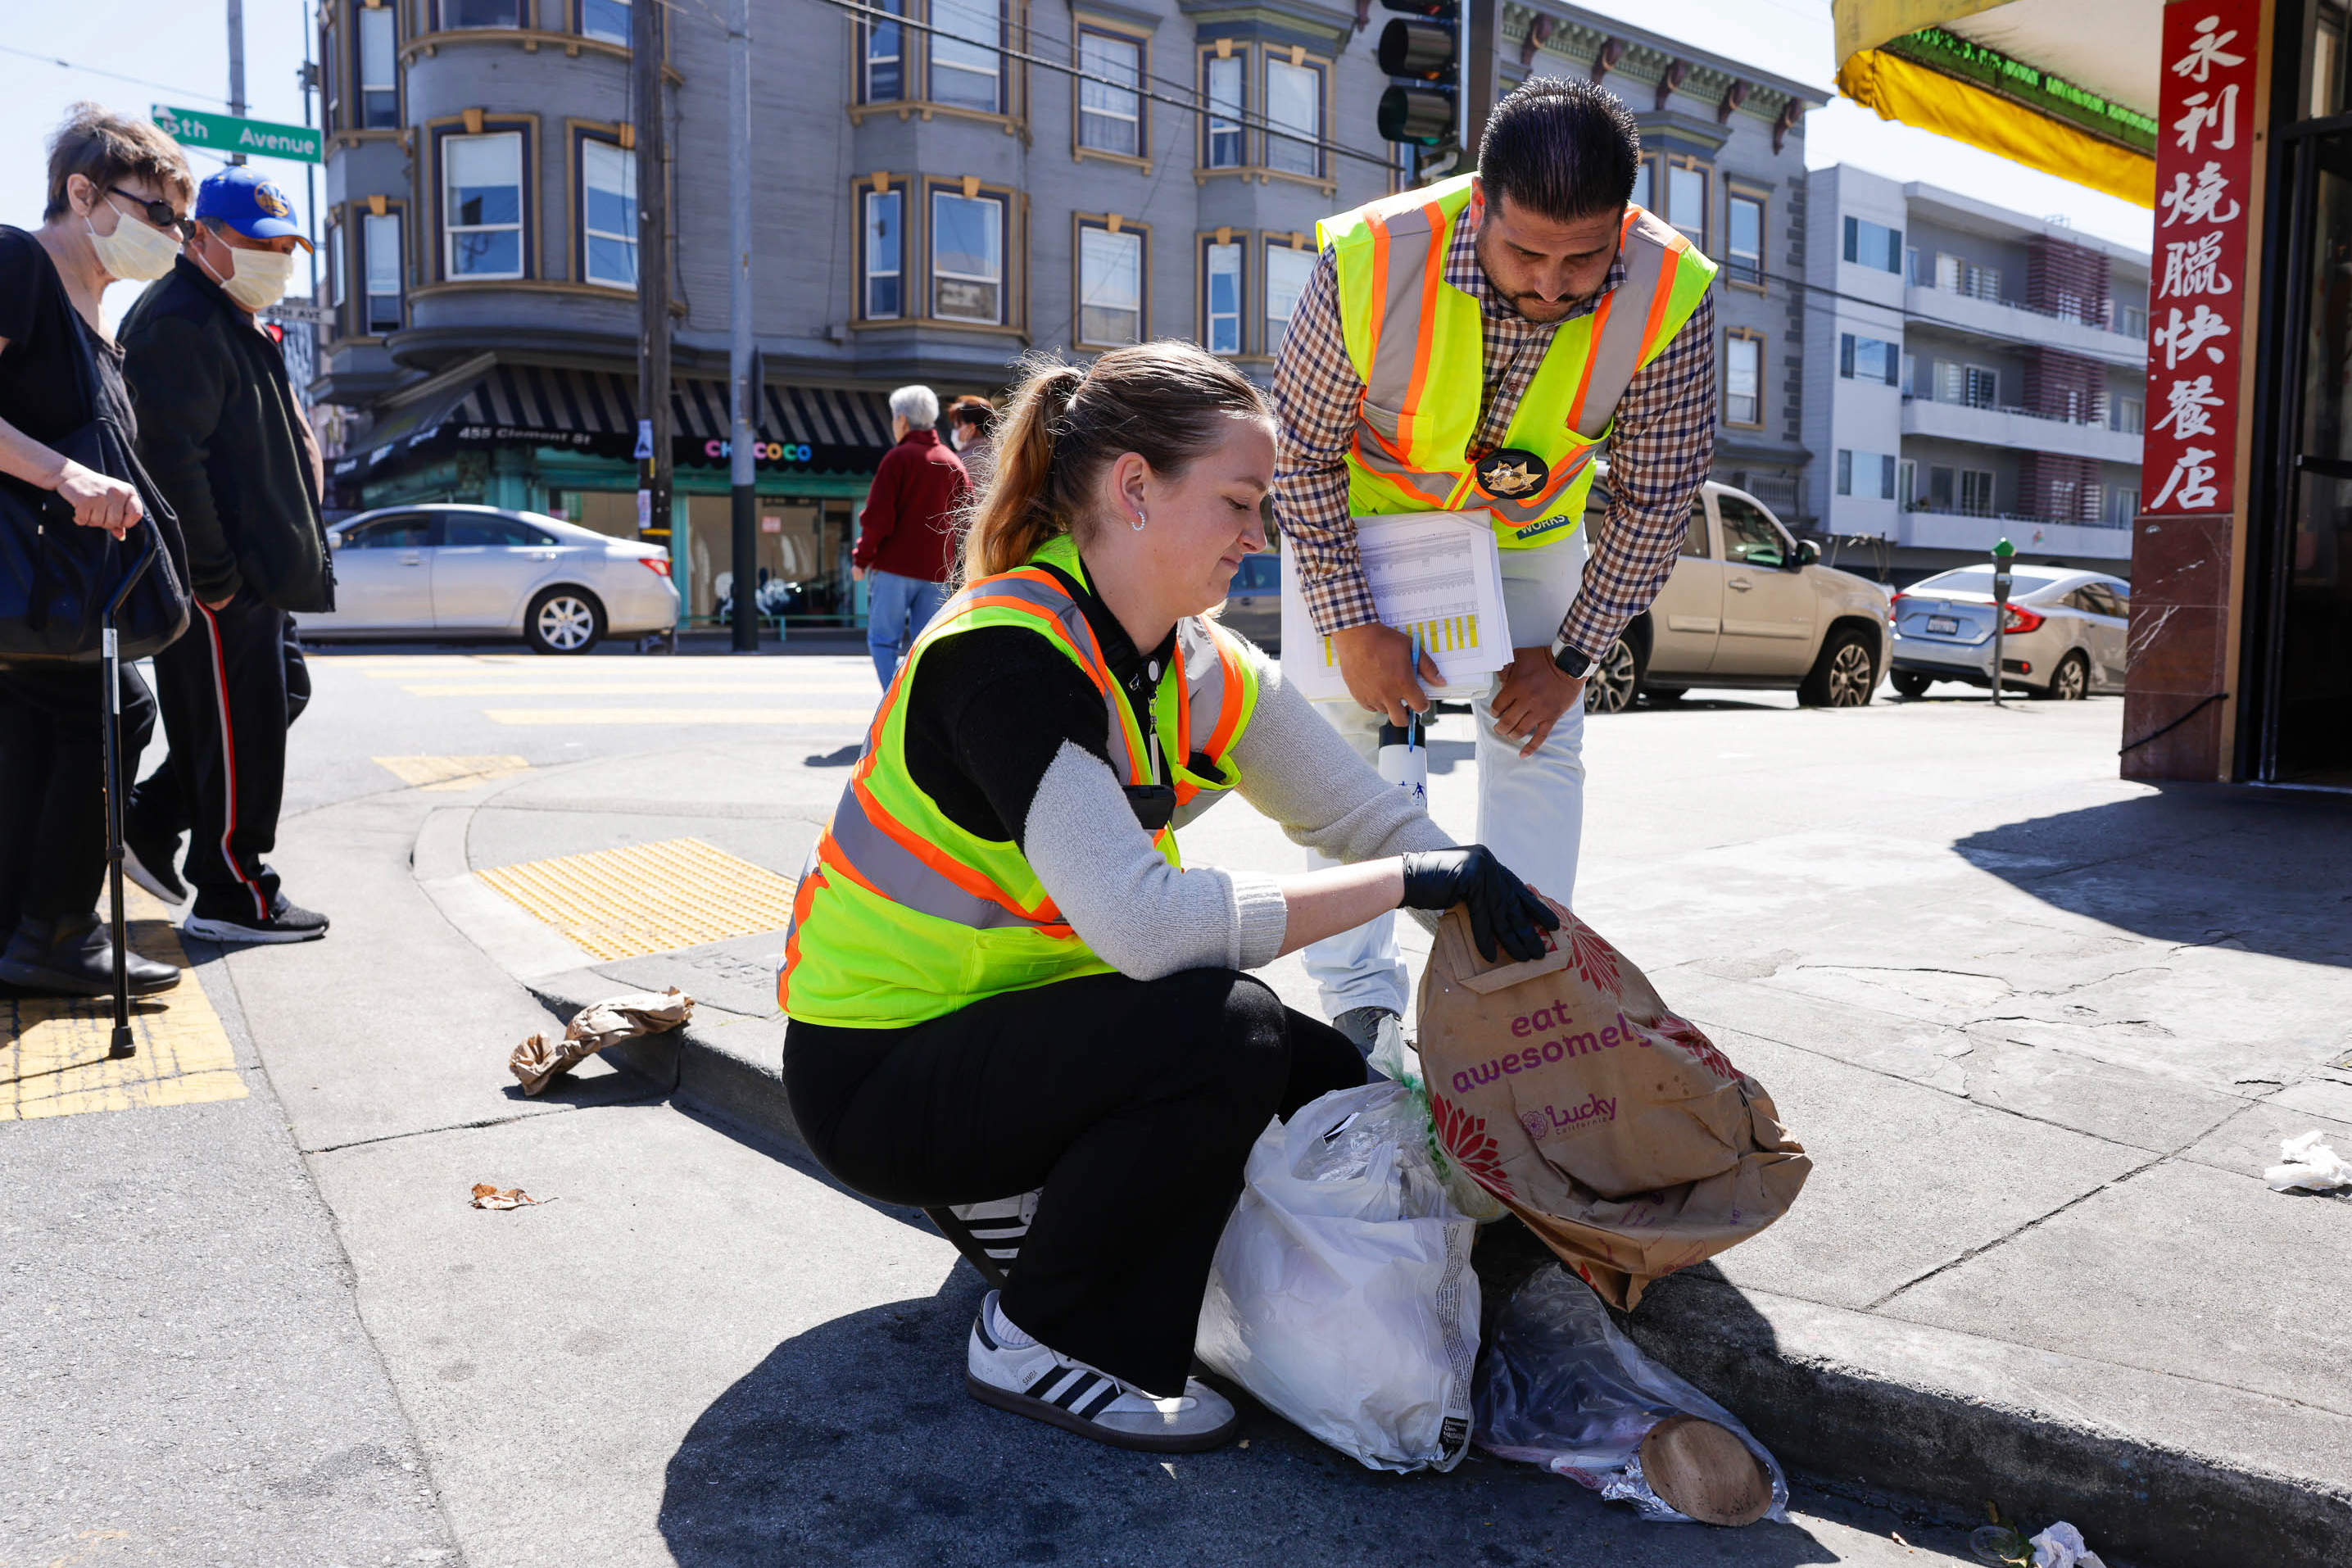 Two volunteers in reflective vests clean a city street corner, collecting litter into bags.